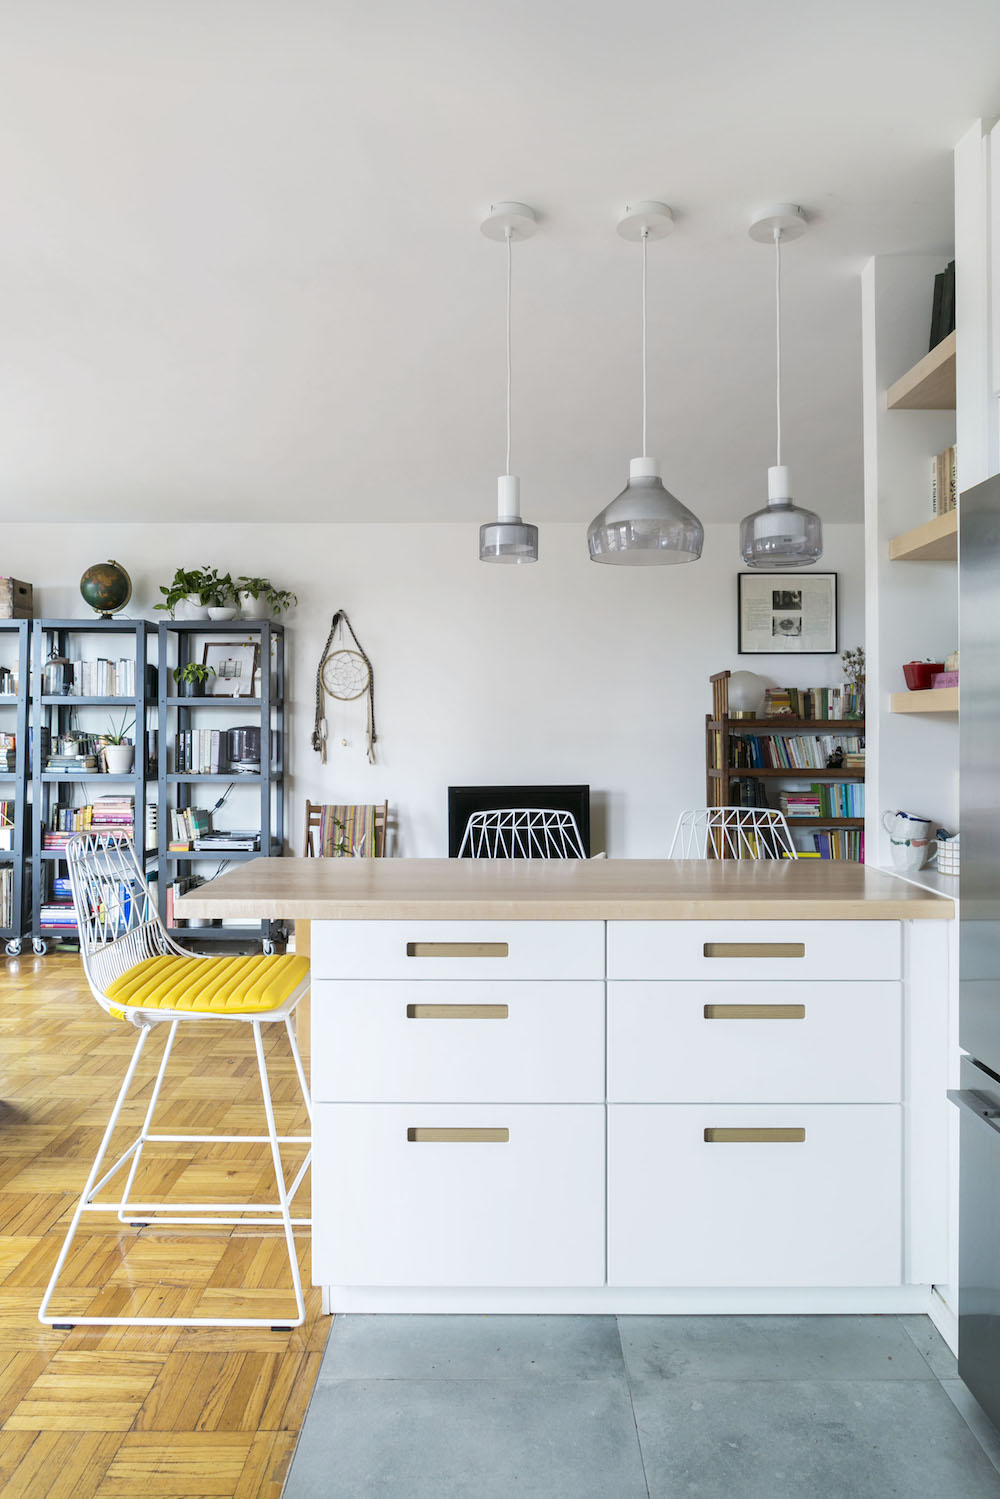 White built-in storage cabinet within the kitchen peninsula